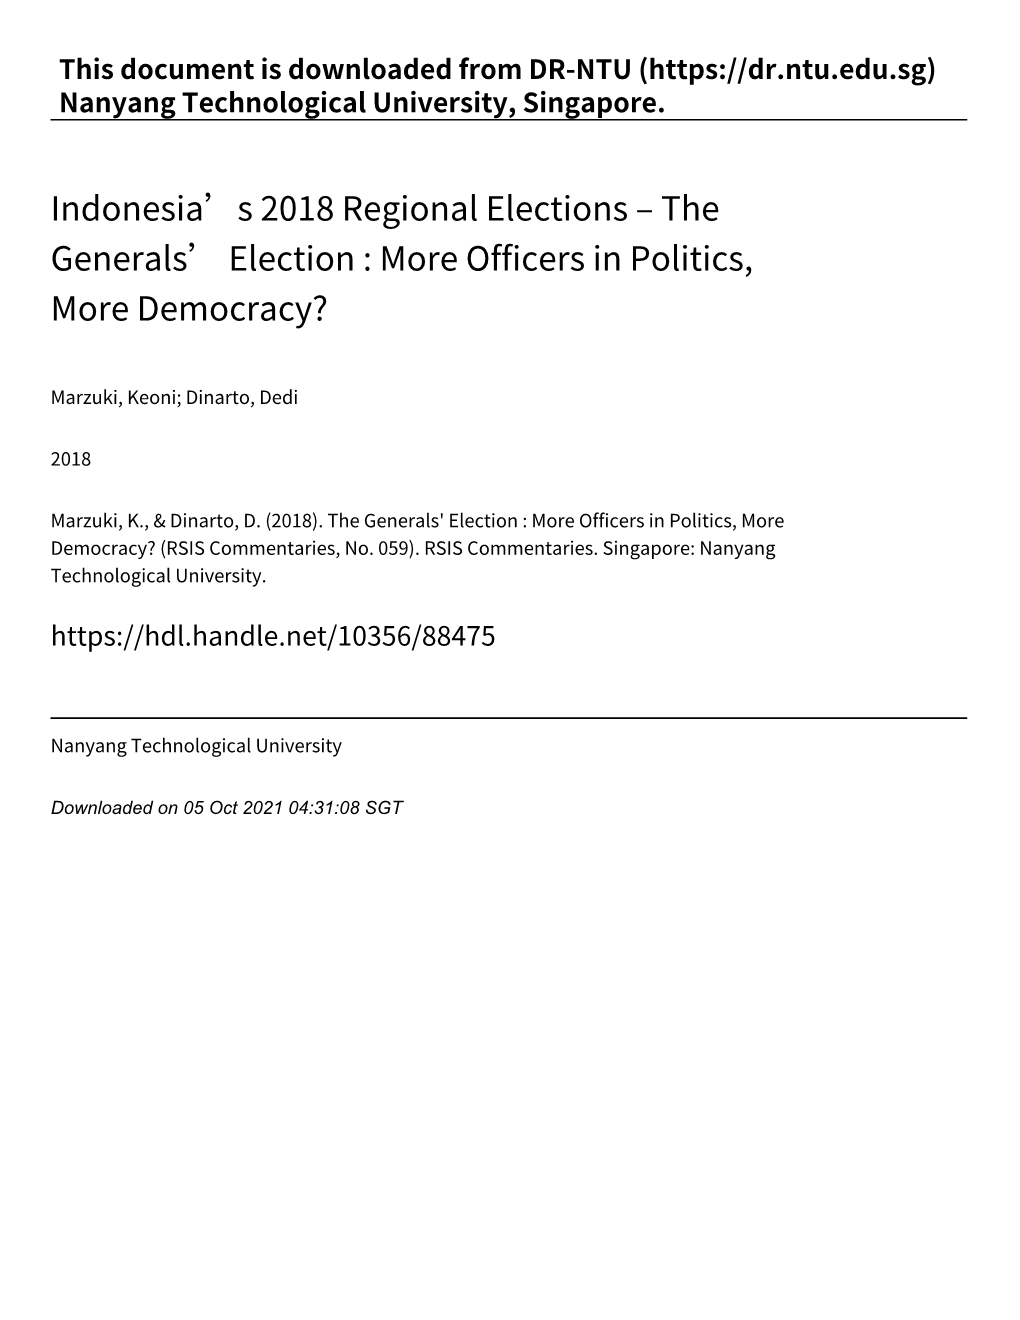 The Generals' Election : More Officers in Politics, More Democracy? (RSIS Commentaries, No